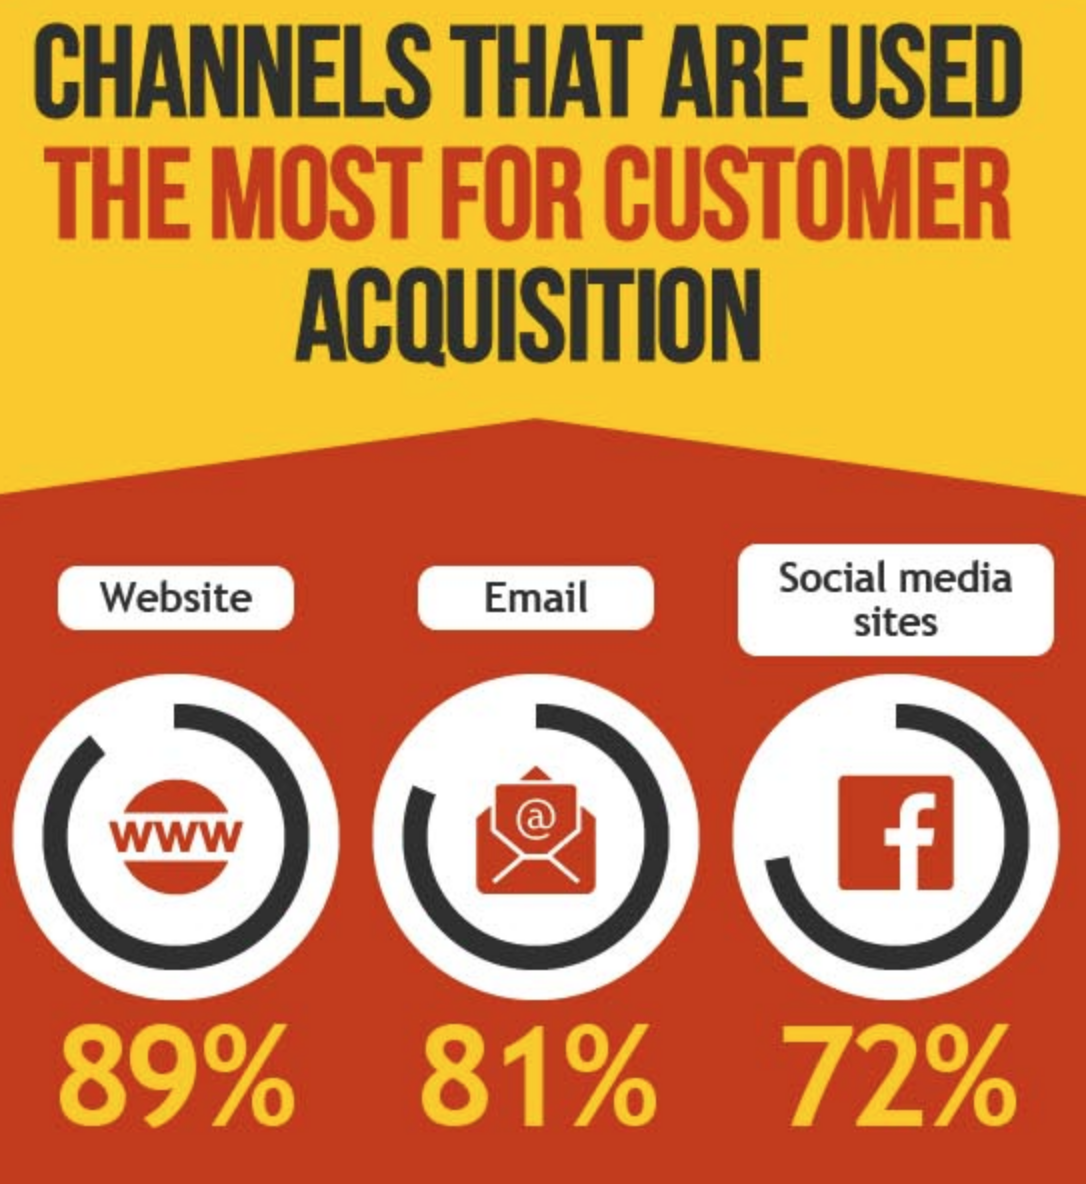 channels-that-are-used-for-customer-acquisition